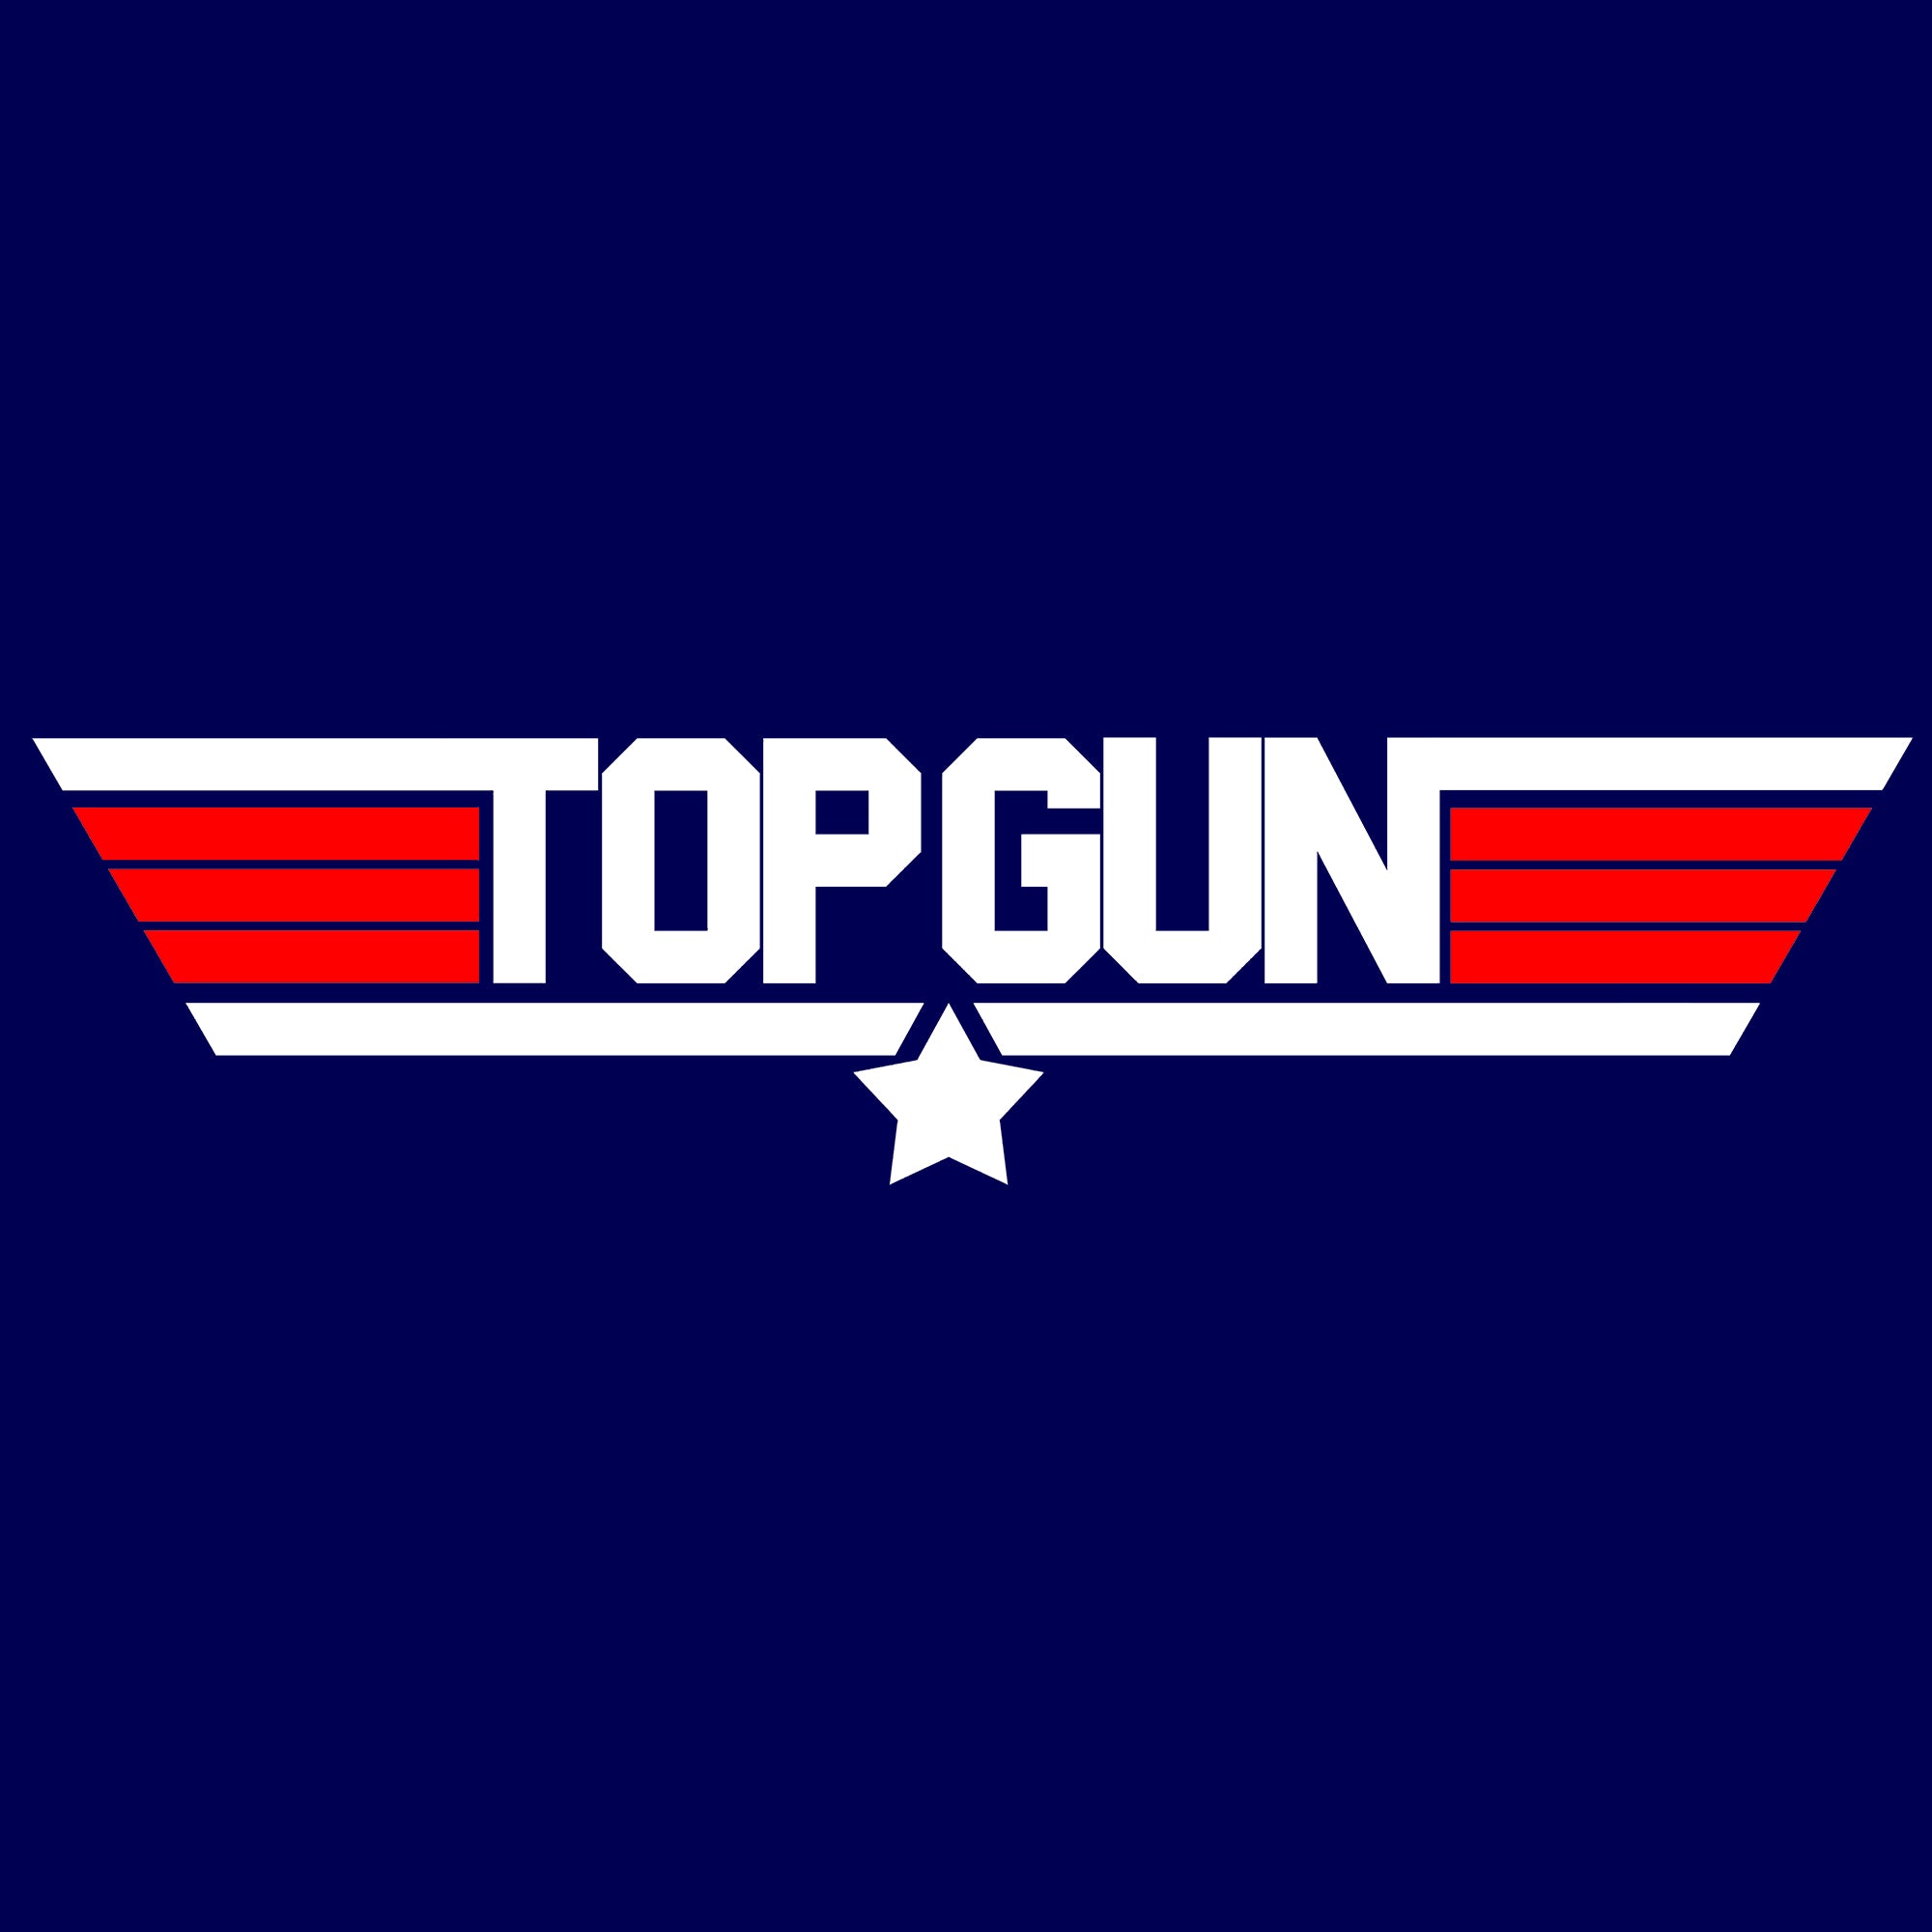 Top Gun Officially Licensed T-Shirts from Coastline Mall